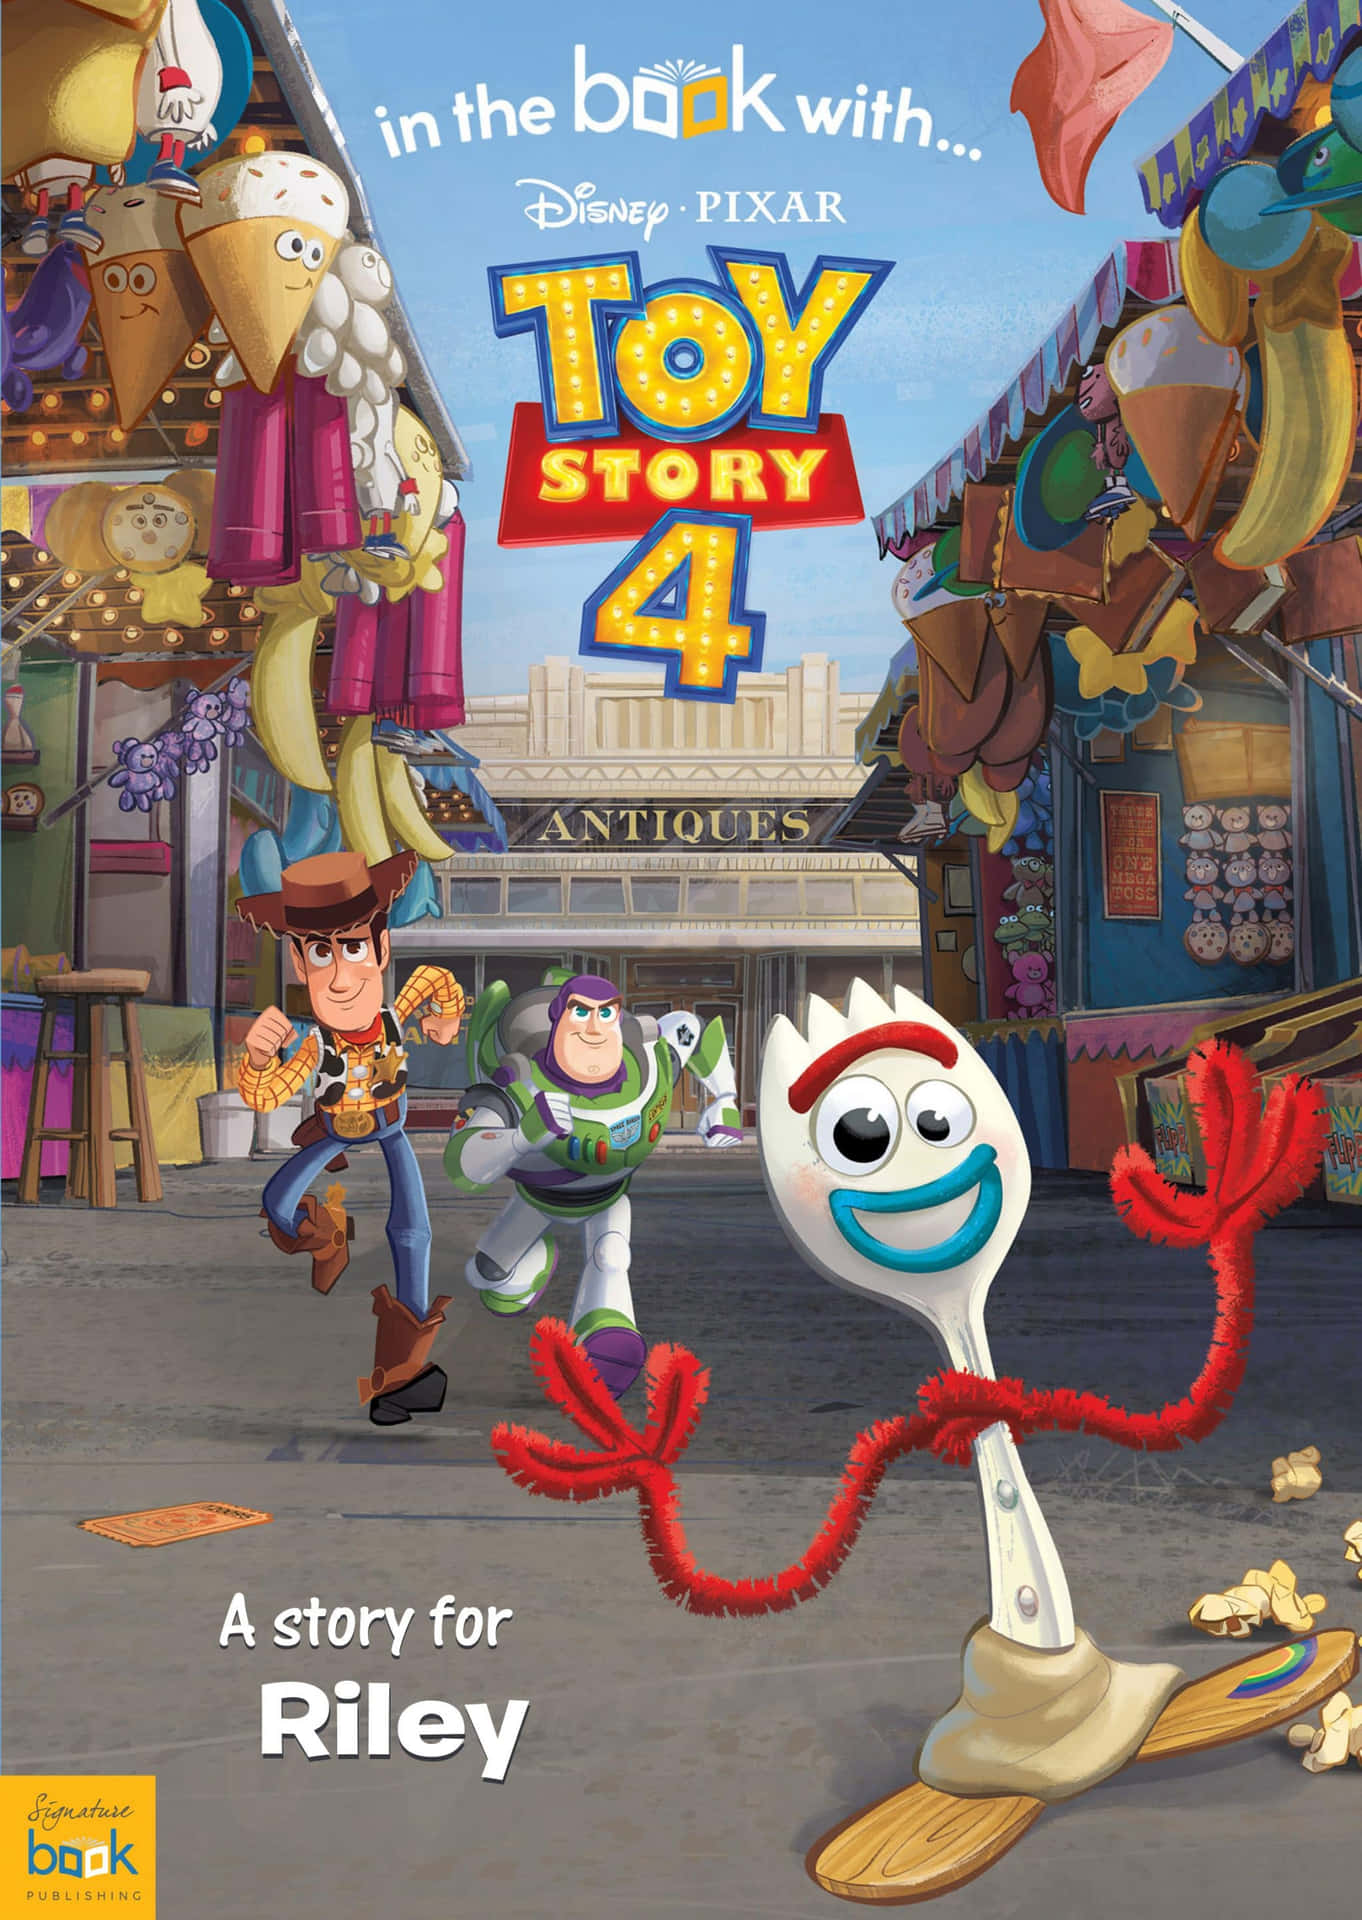 Join Woody, Buzz, and the rest of the gang in their latest adventure with Toy Story 4!